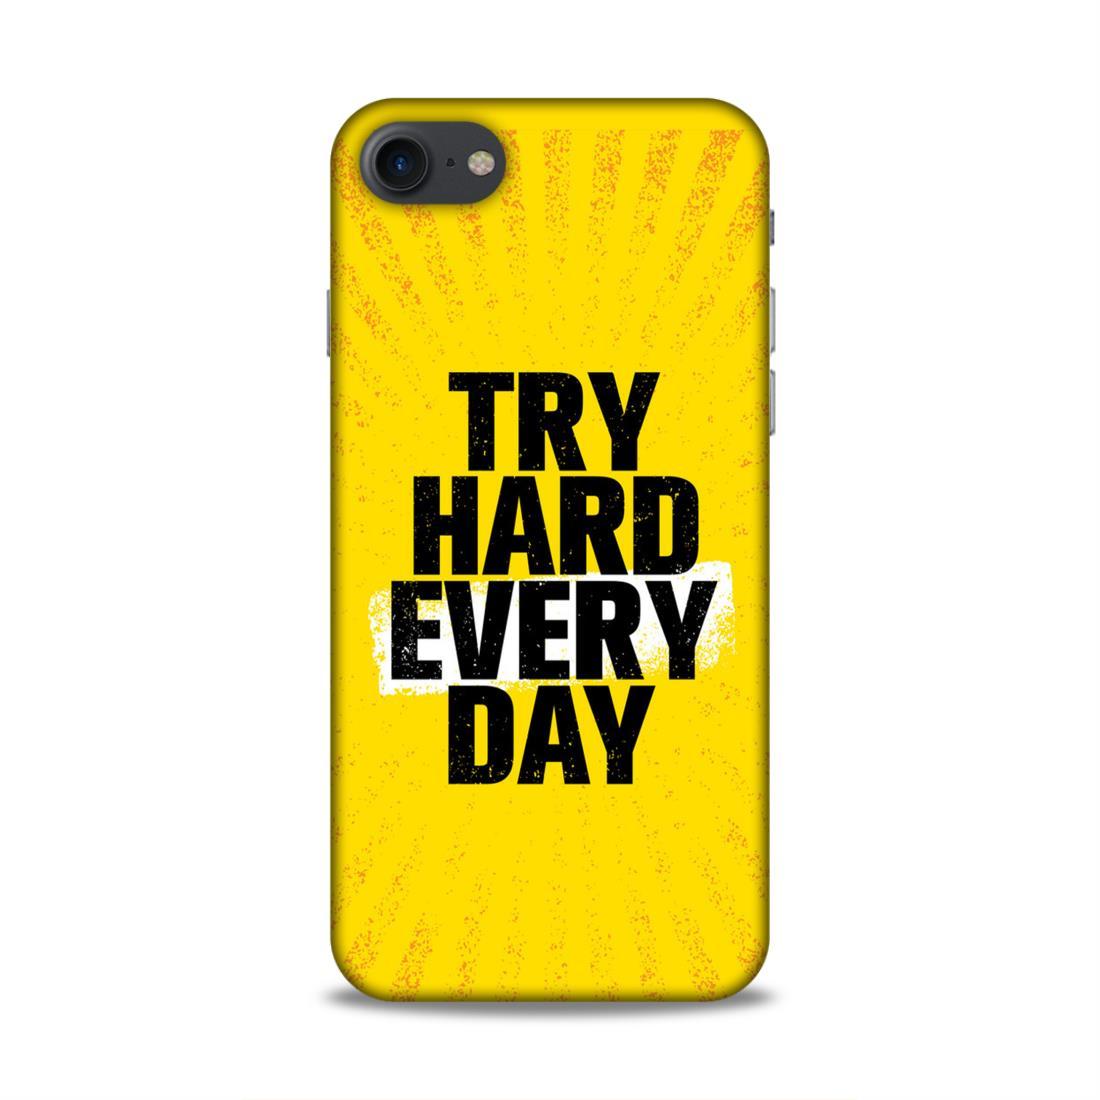 Try Hard Every Day iPhone 7 Mobile Case Cover